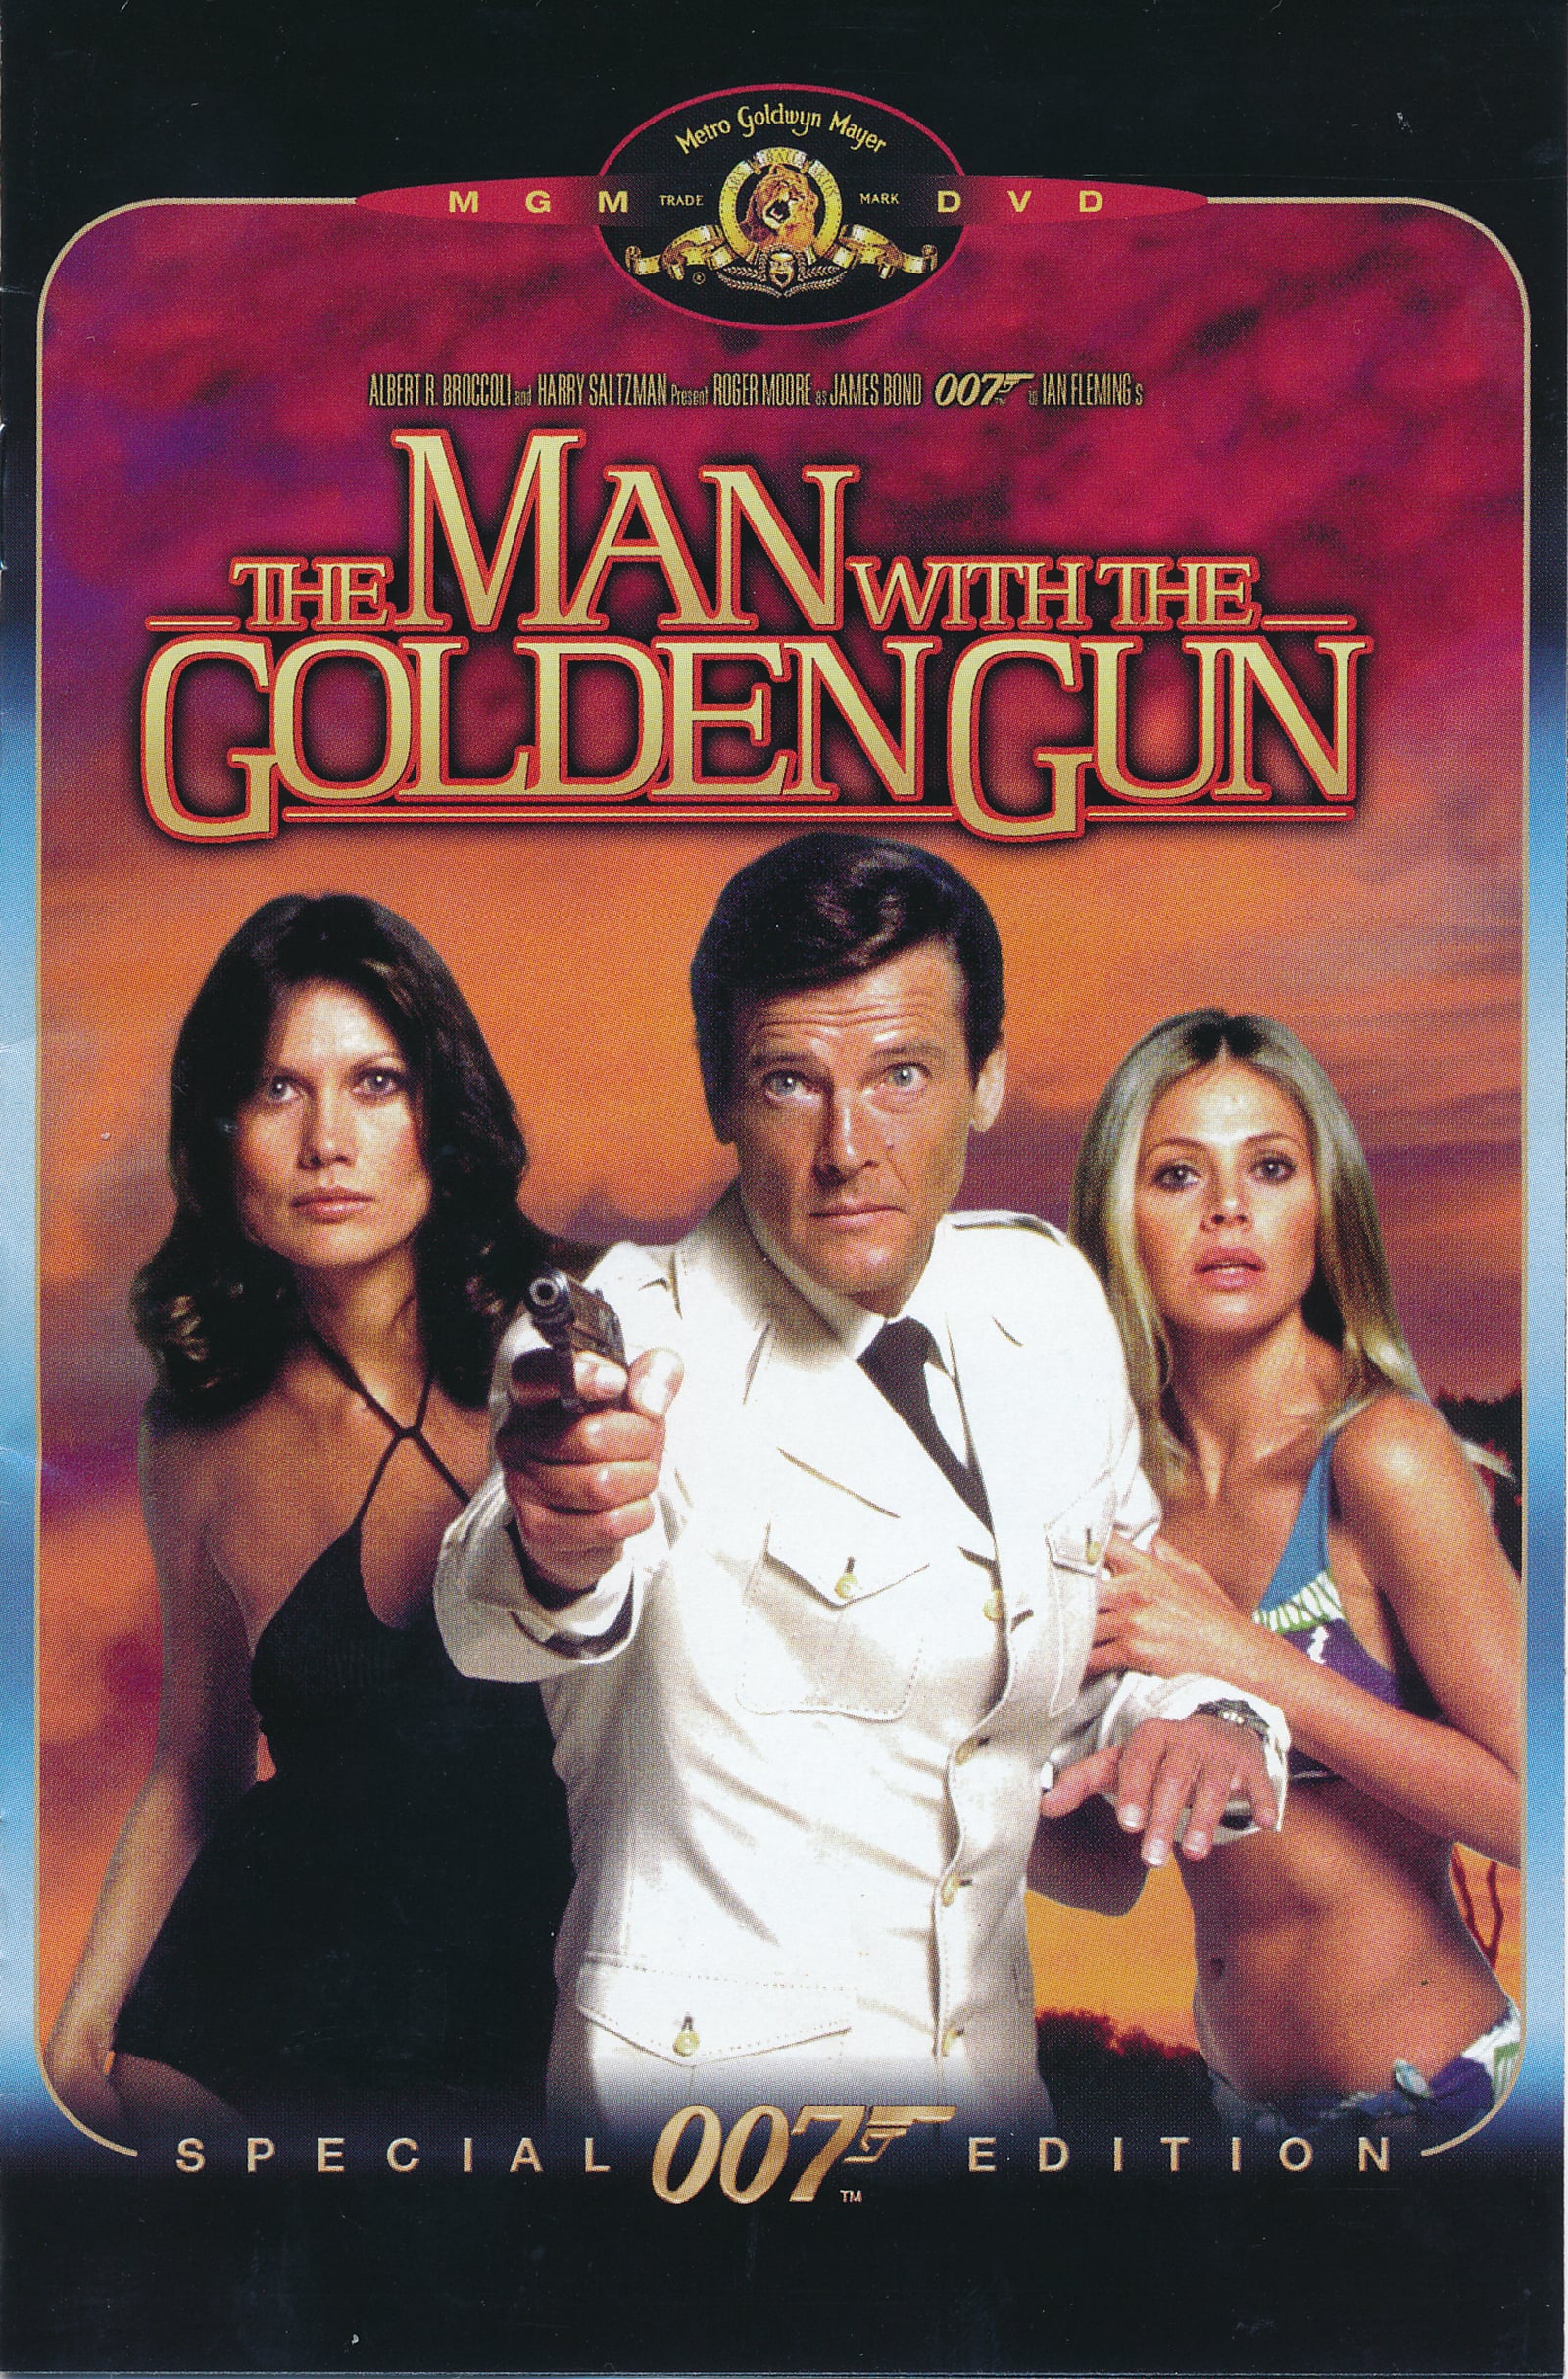 The Man with the Golden Gun Picture - Image Abyss